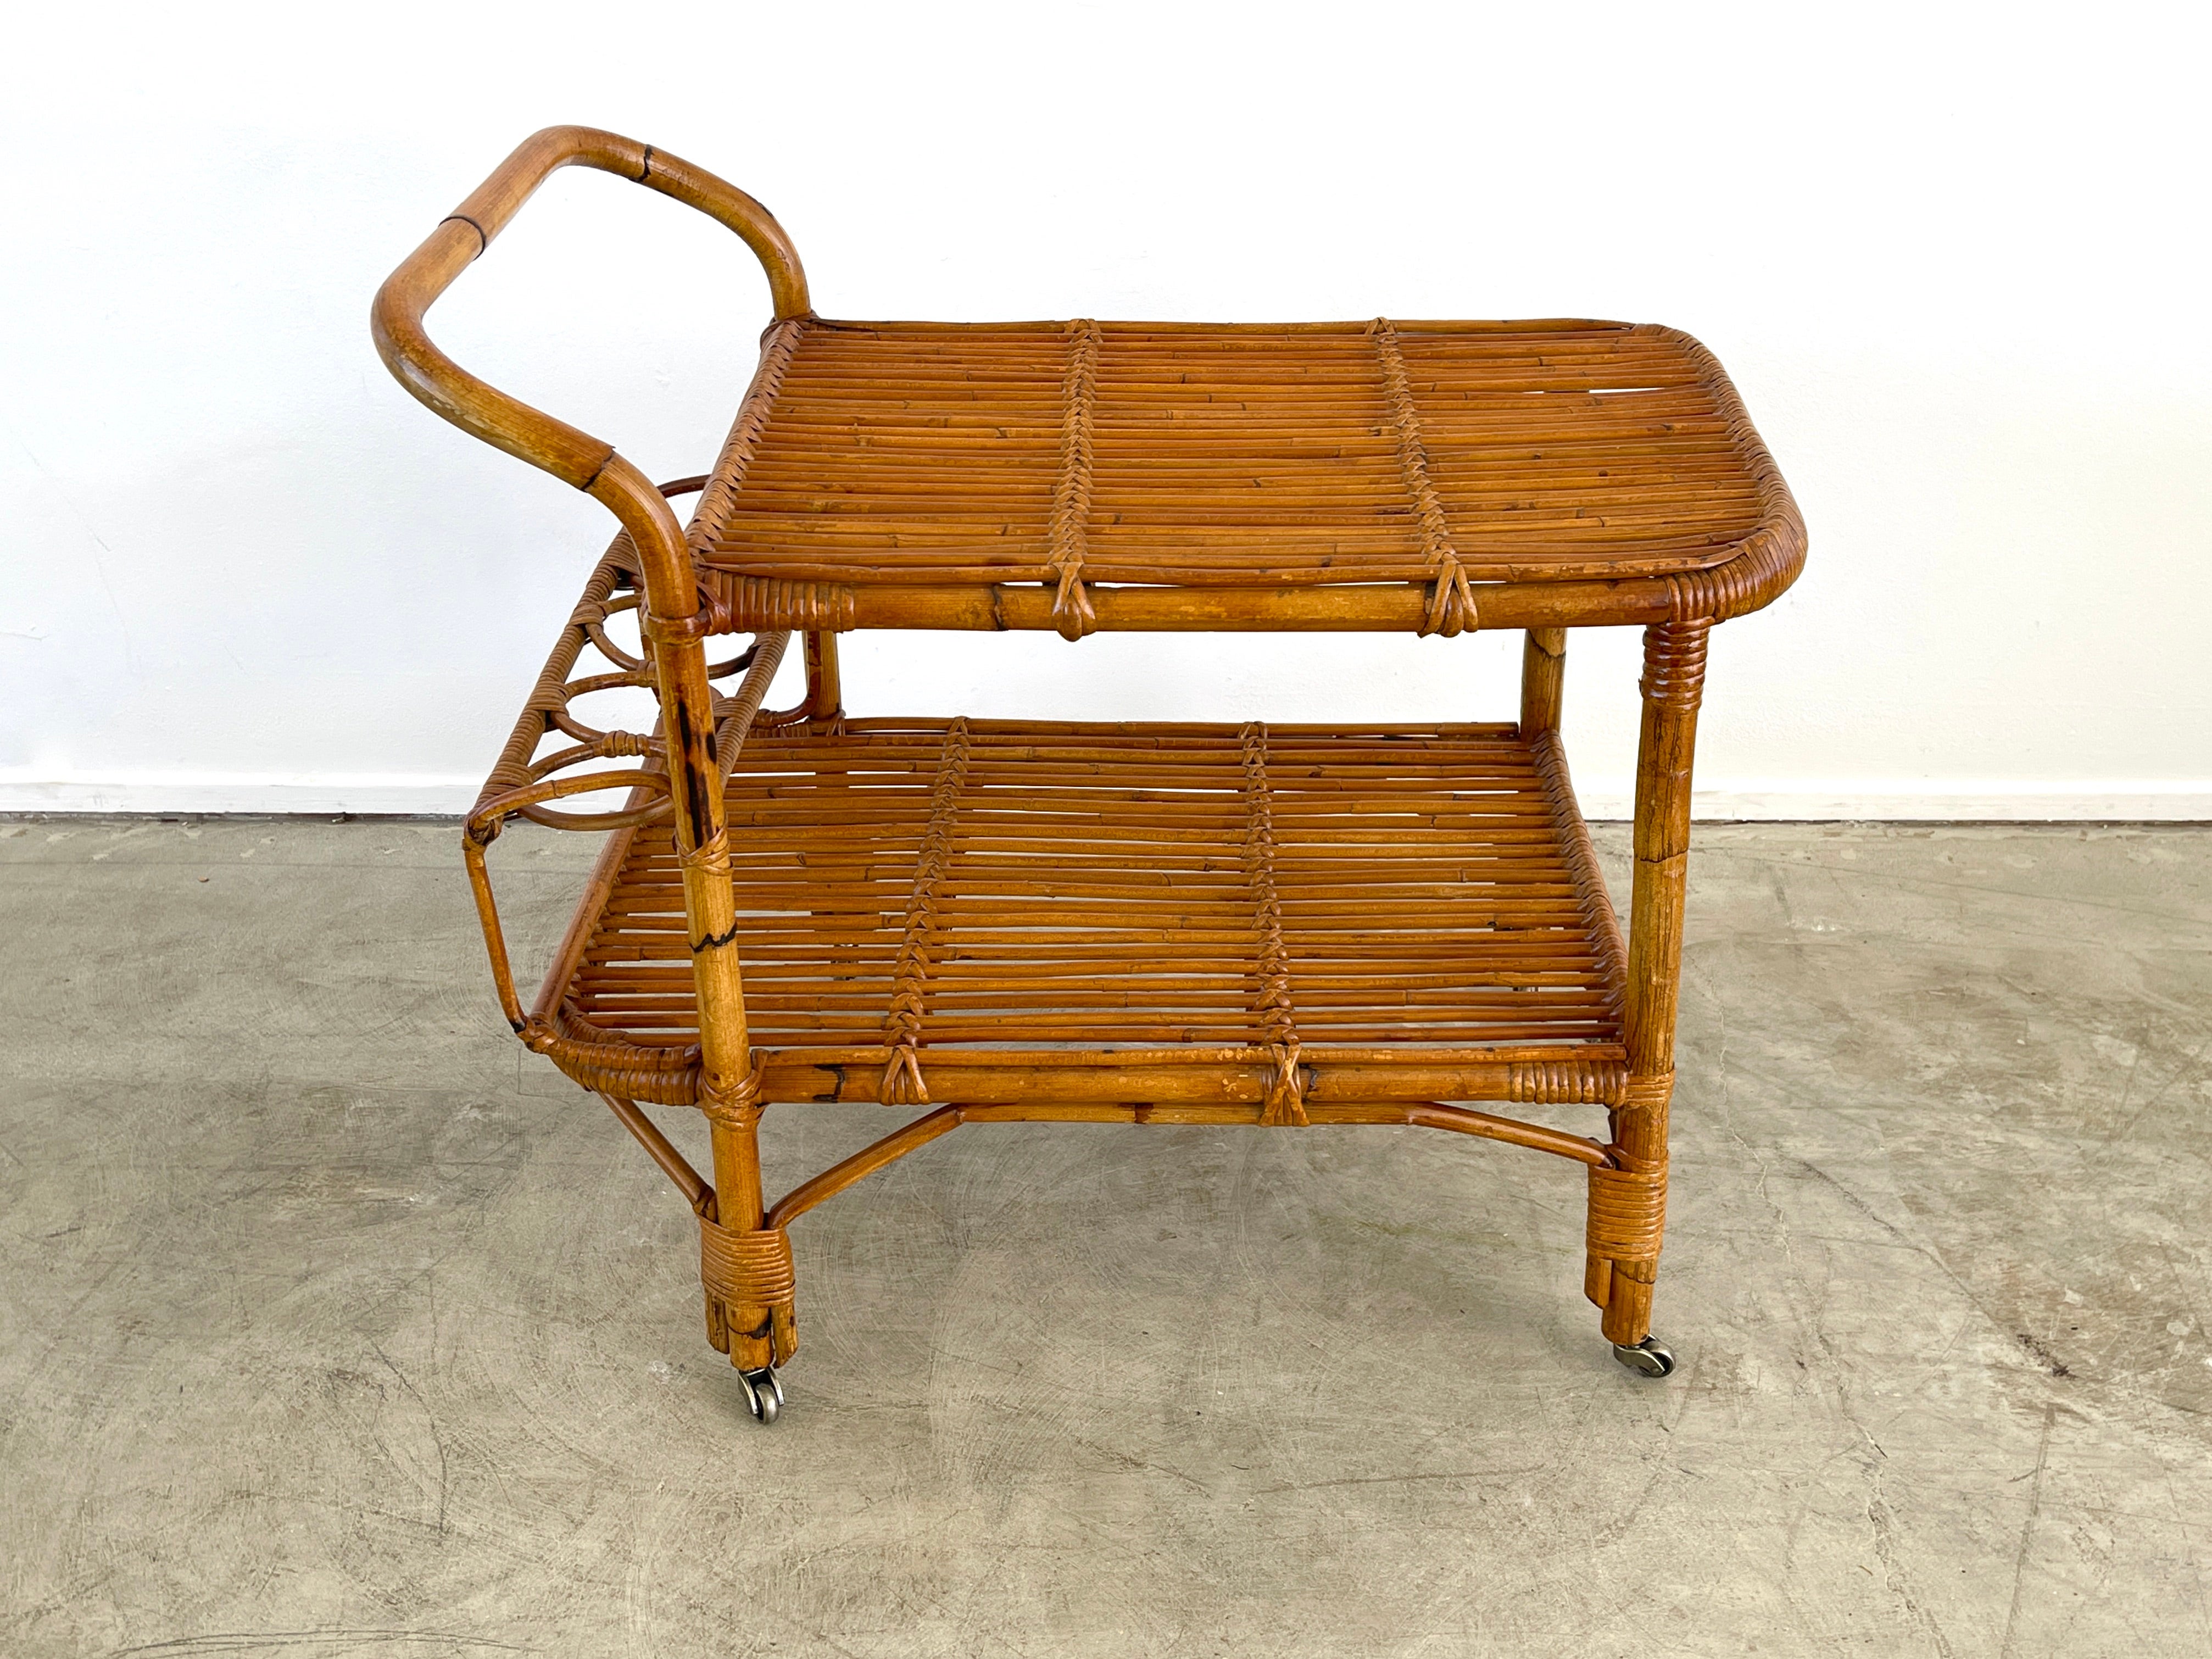 Italian bamboo bar cart with original casters and 2 tiers for storage. 
Circa 1960s.